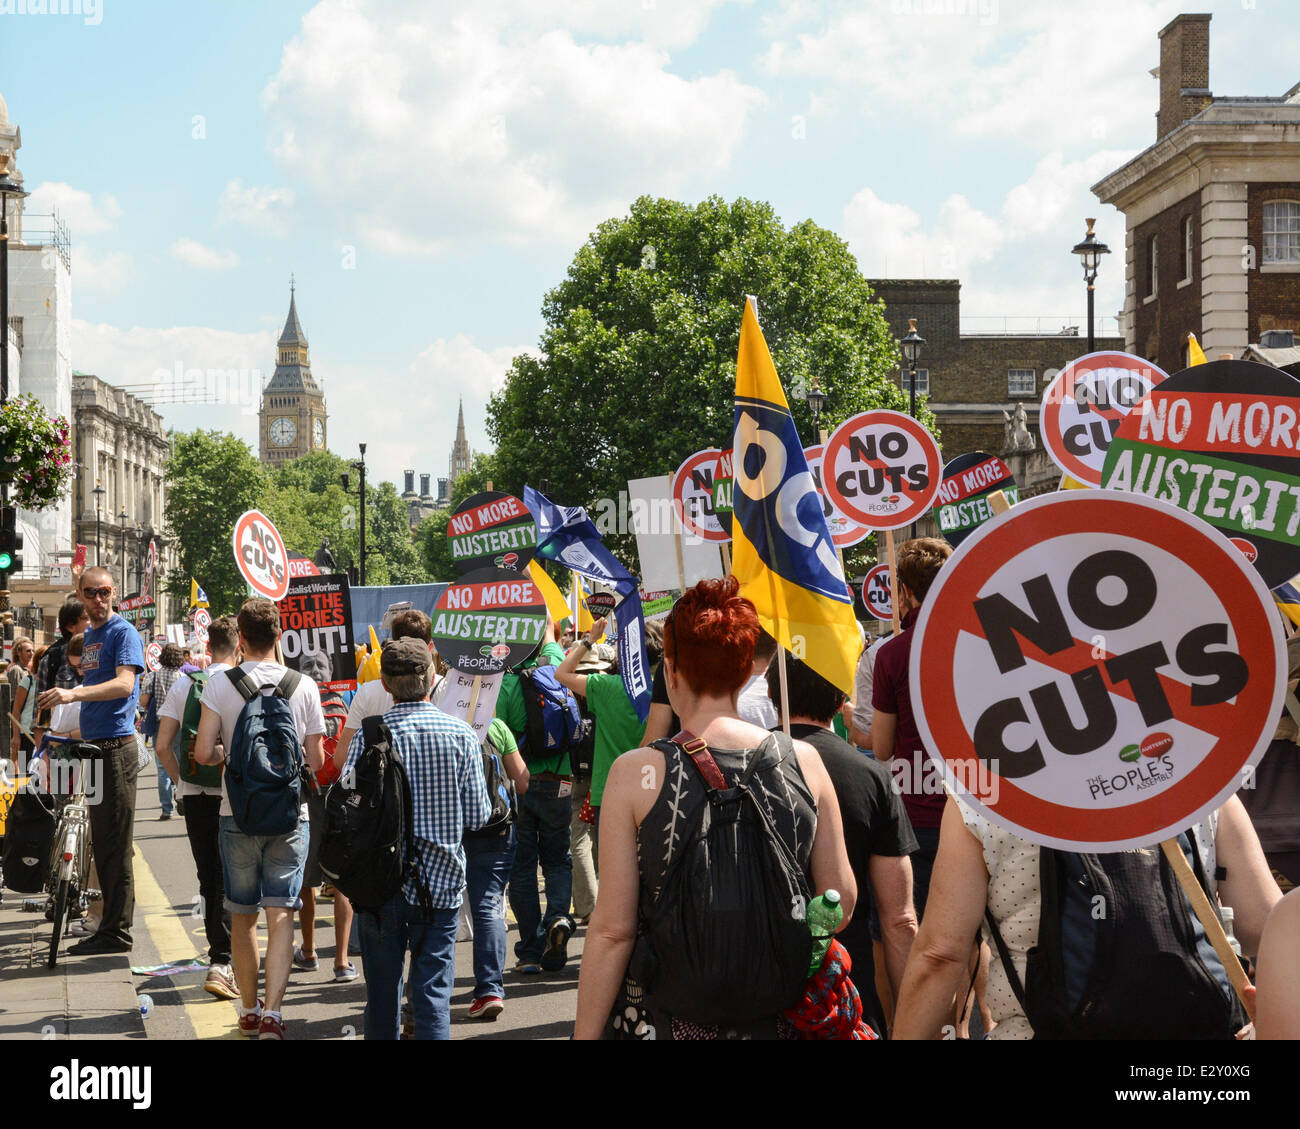 London, 21 June 2014. A national demonstration called “No more austerity – demand the alternative” marches through central London, finishing in Parliament Square for a rally. Credit:  Patricia Phillips/Alamy Live News Stock Photo